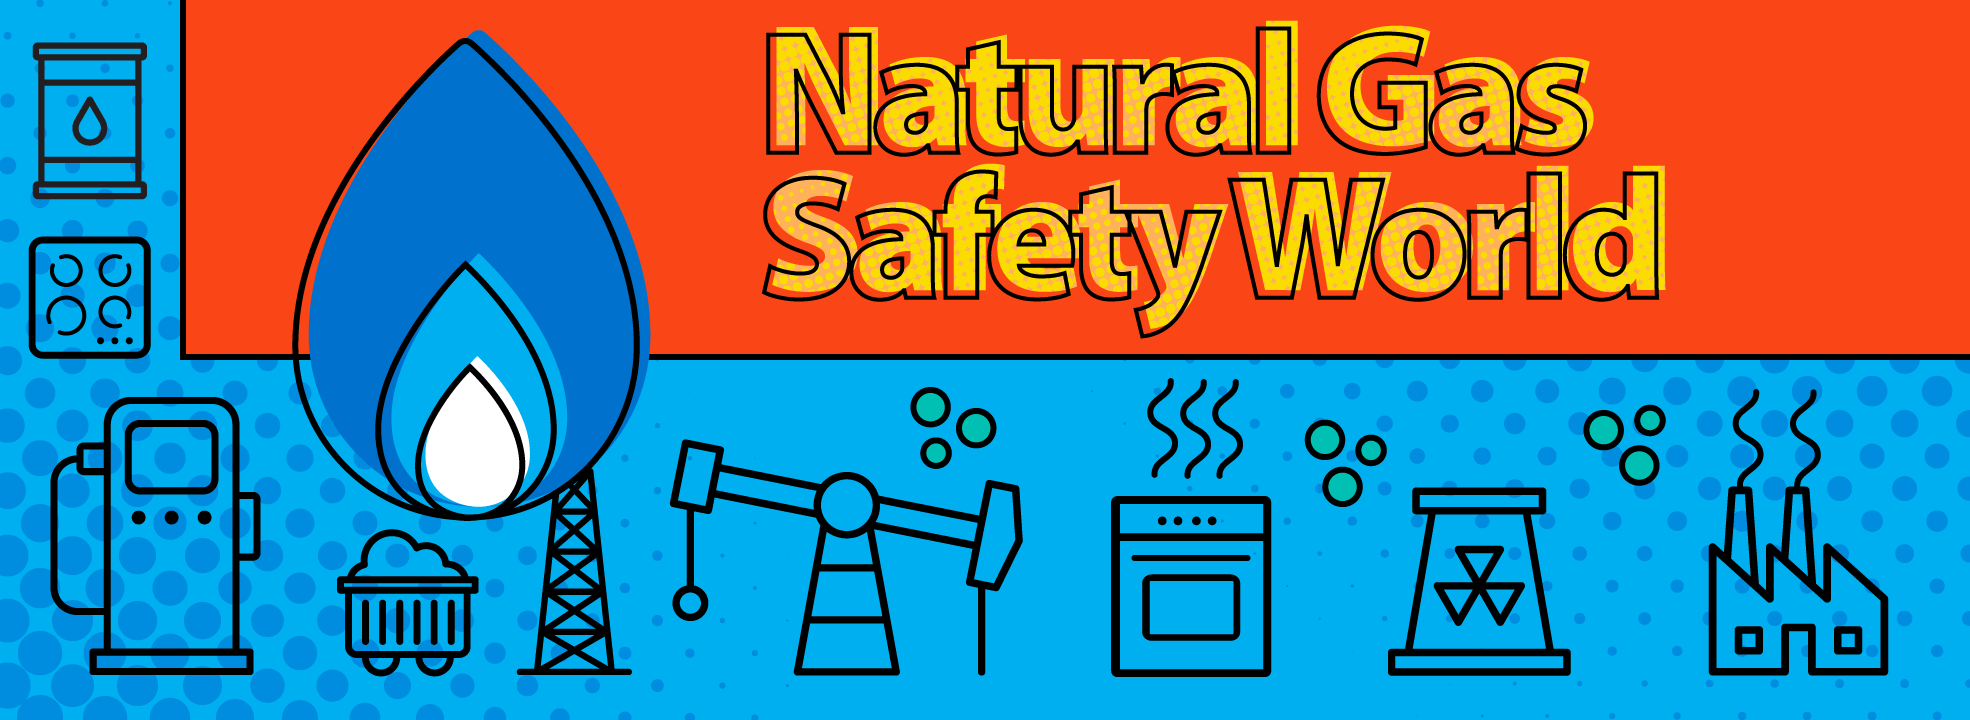 Natural Gas Safety-SMART